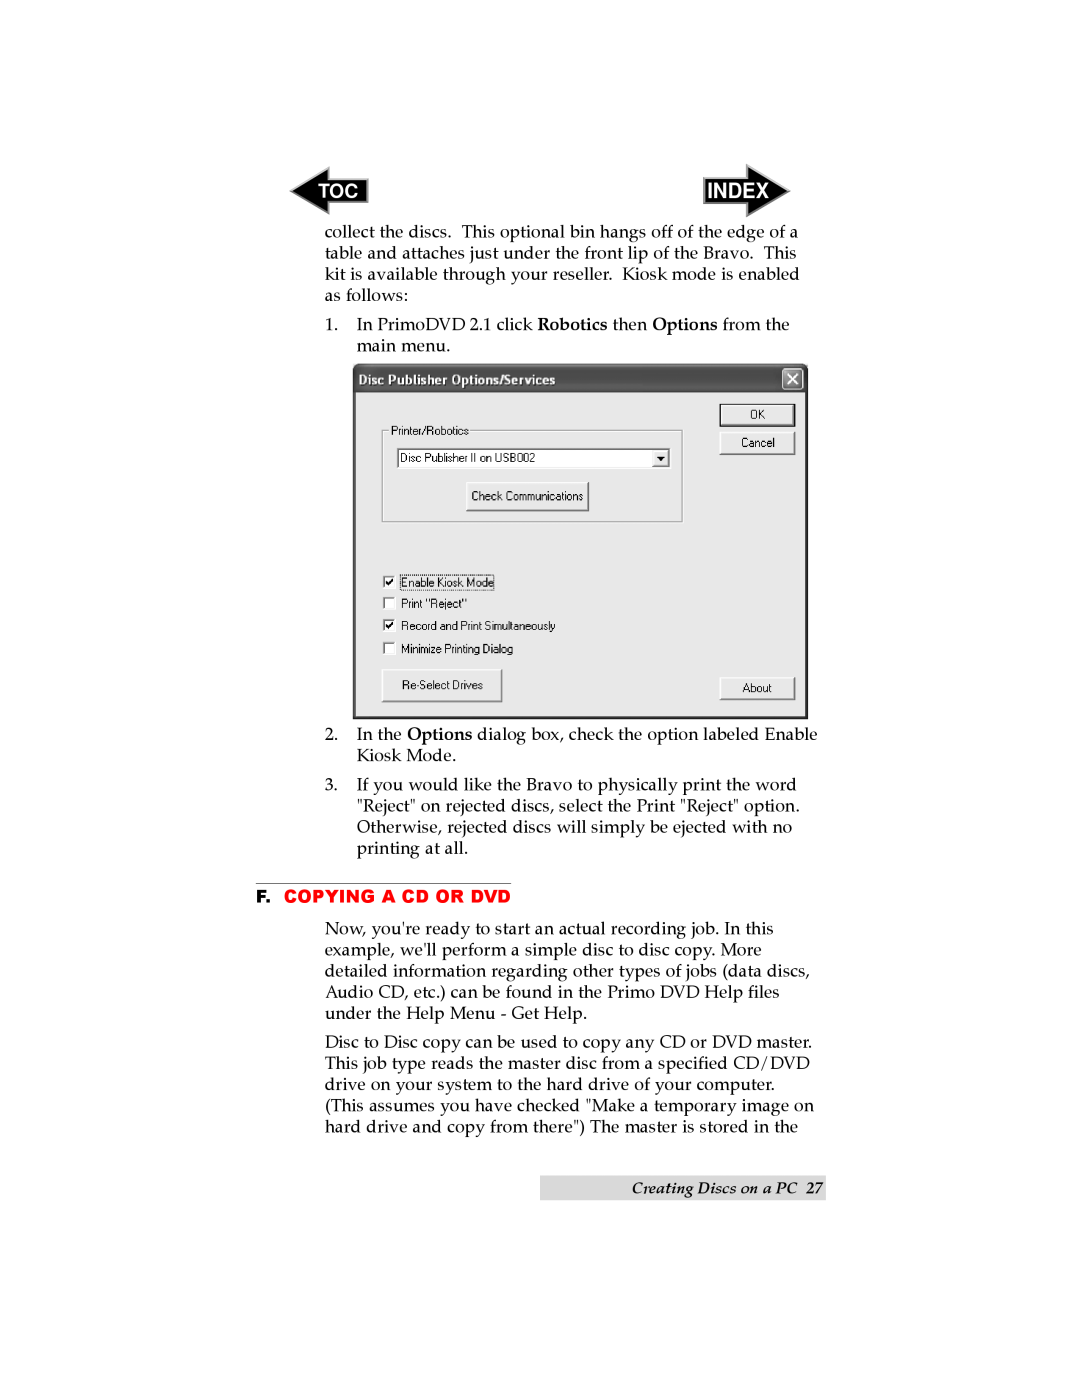 Primera Technology II user manual Index, F.Copying A Cd Or Dvd 